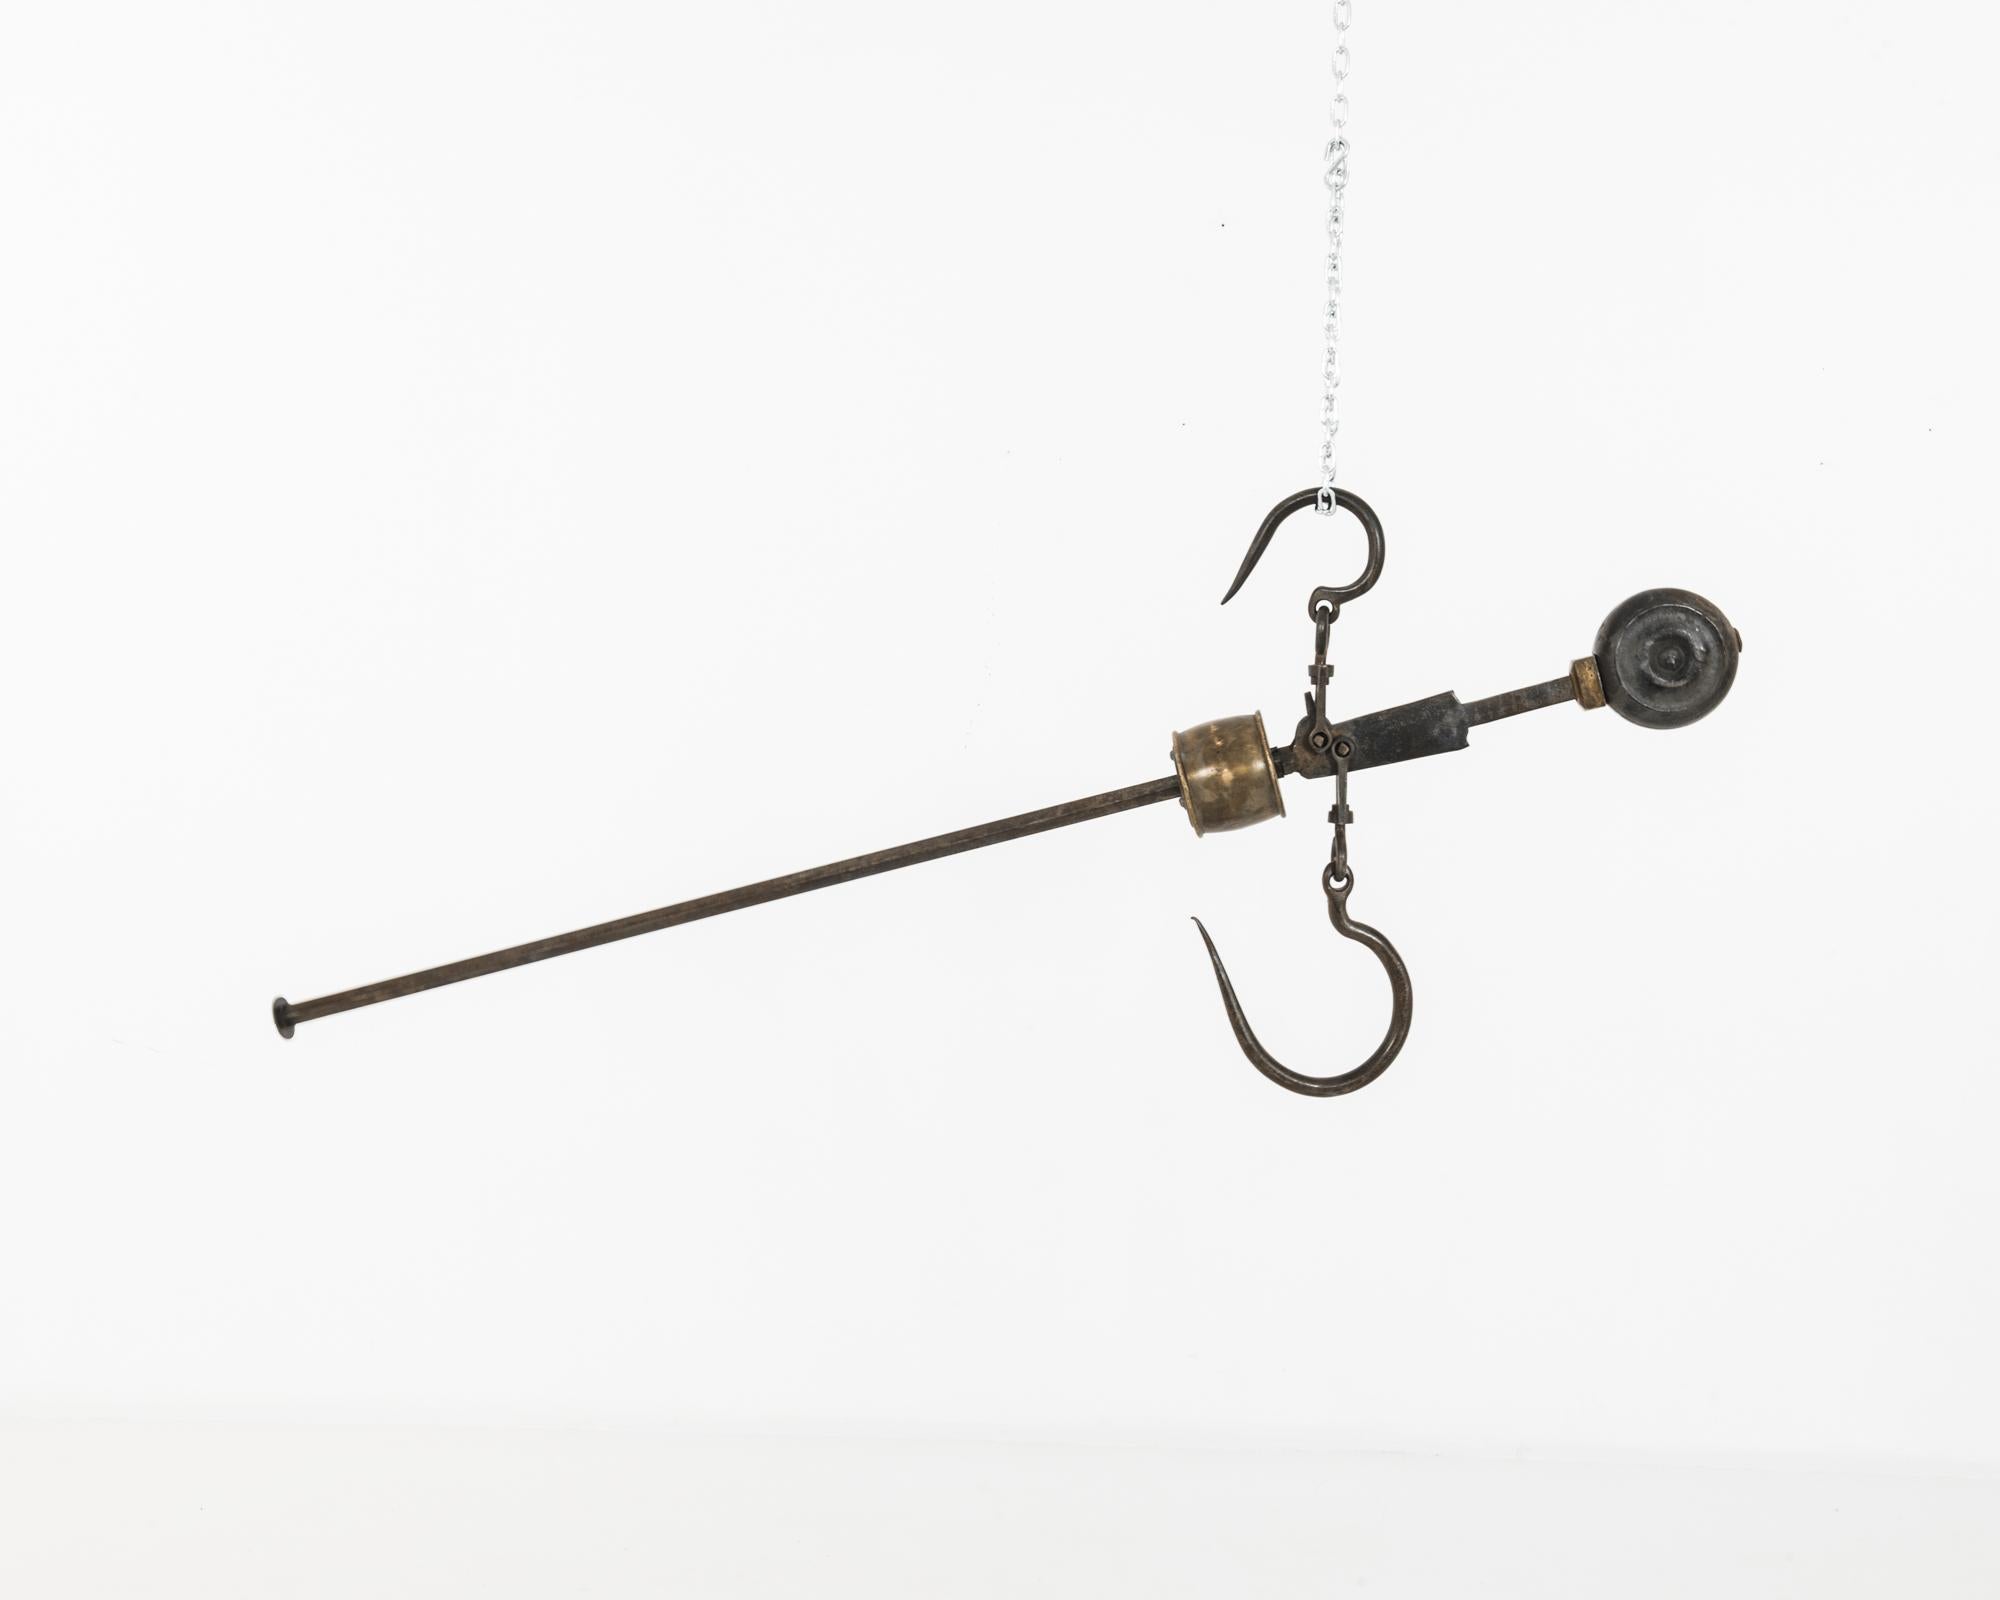 This antique steelyard balance features two hooks and a barrel-shaped cast iron counterweight. One hook would have been suspended from above, with the load hung from the lower hook. The counterweight would be adjusted to balance both arms, and its